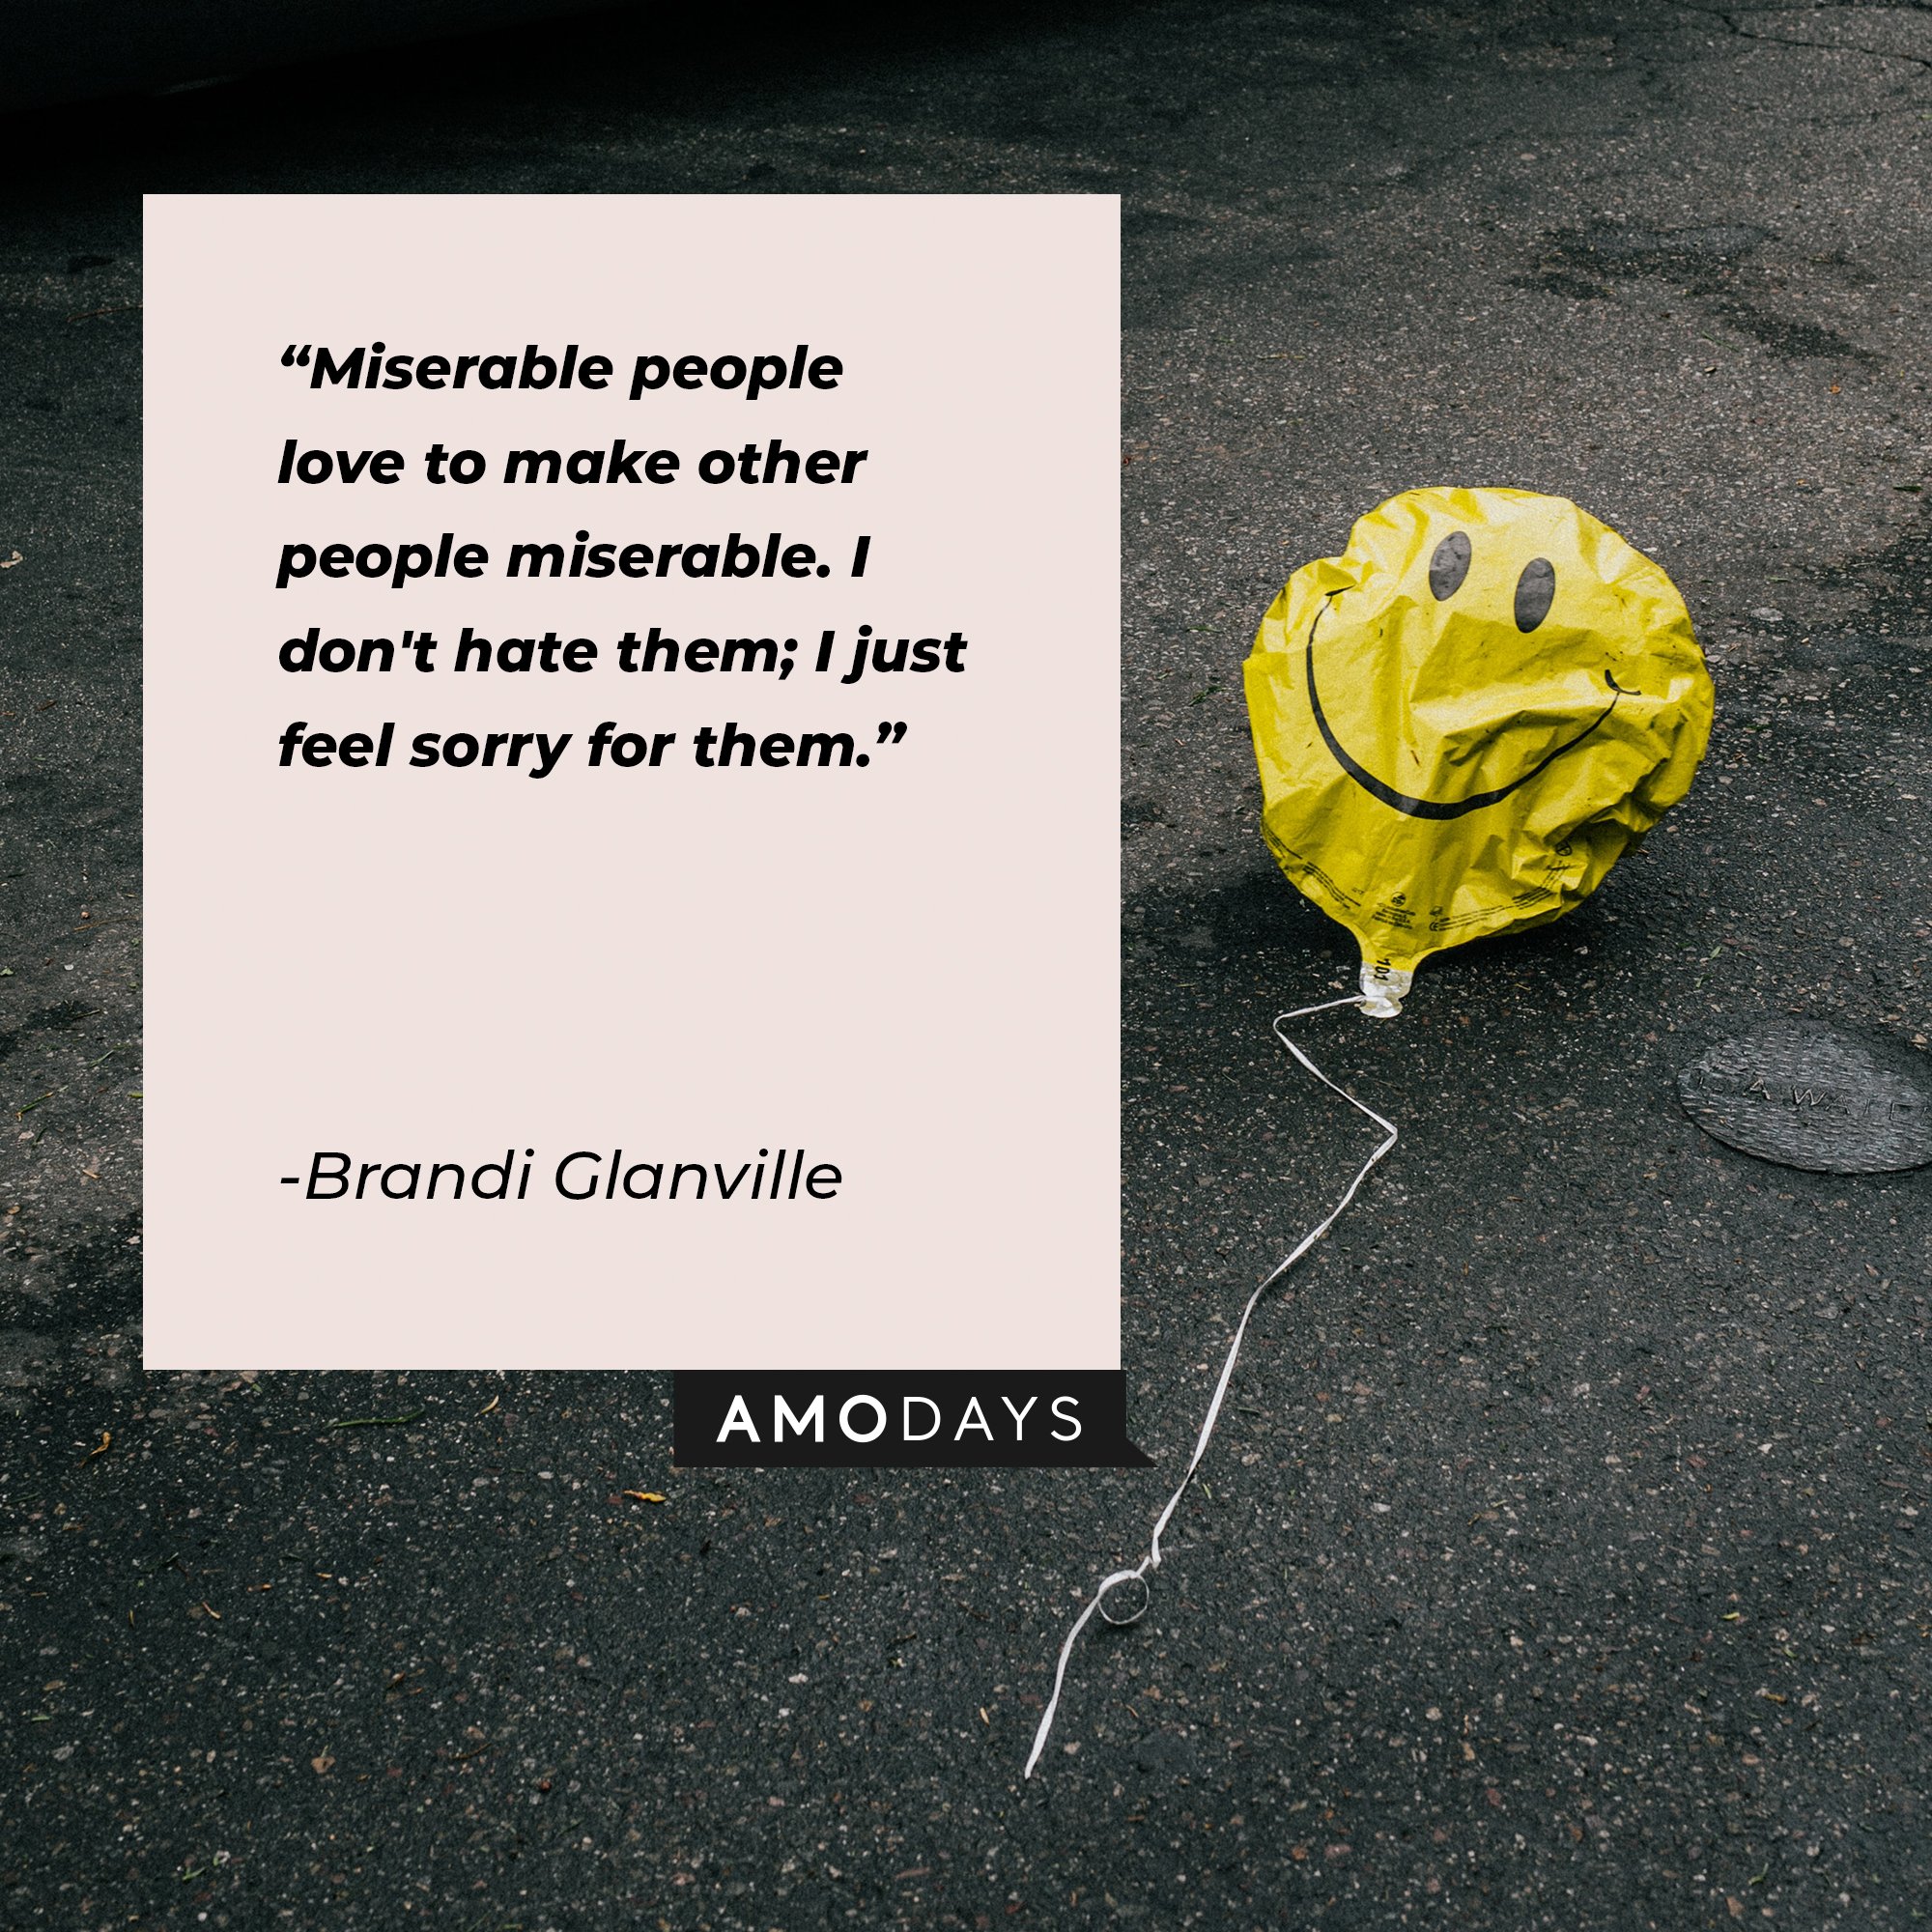 Brandi Glanville’s quote: "Miserable people love to make other people miserable. I don't hate them; I just feel sorry for them." | Image: AmoDays